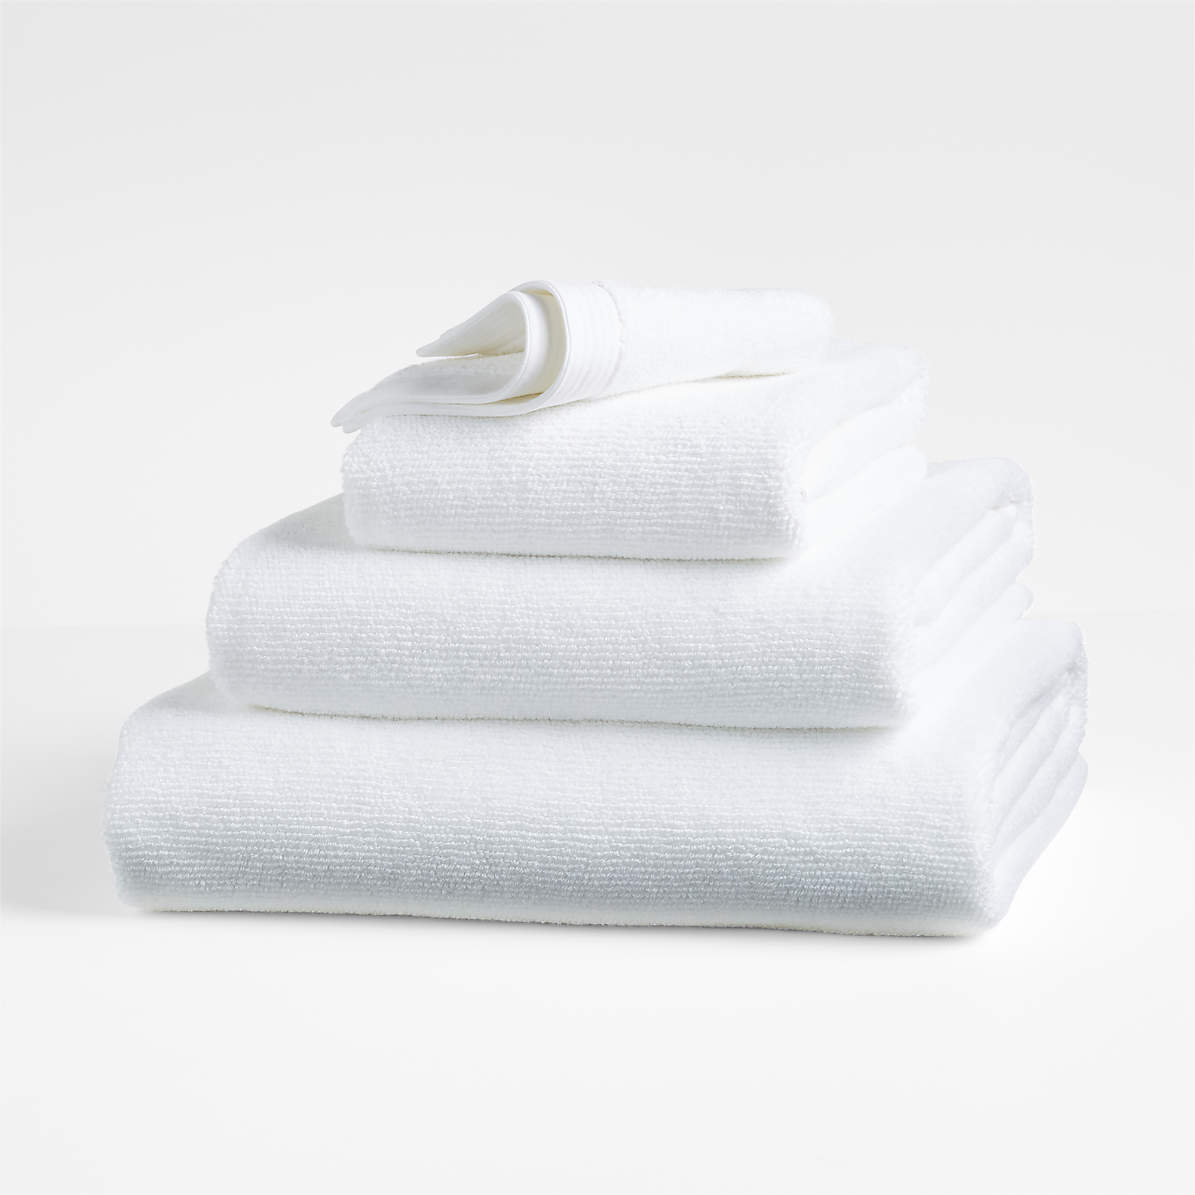 9 Best Organic Towels For A Clean And Conscious Bath